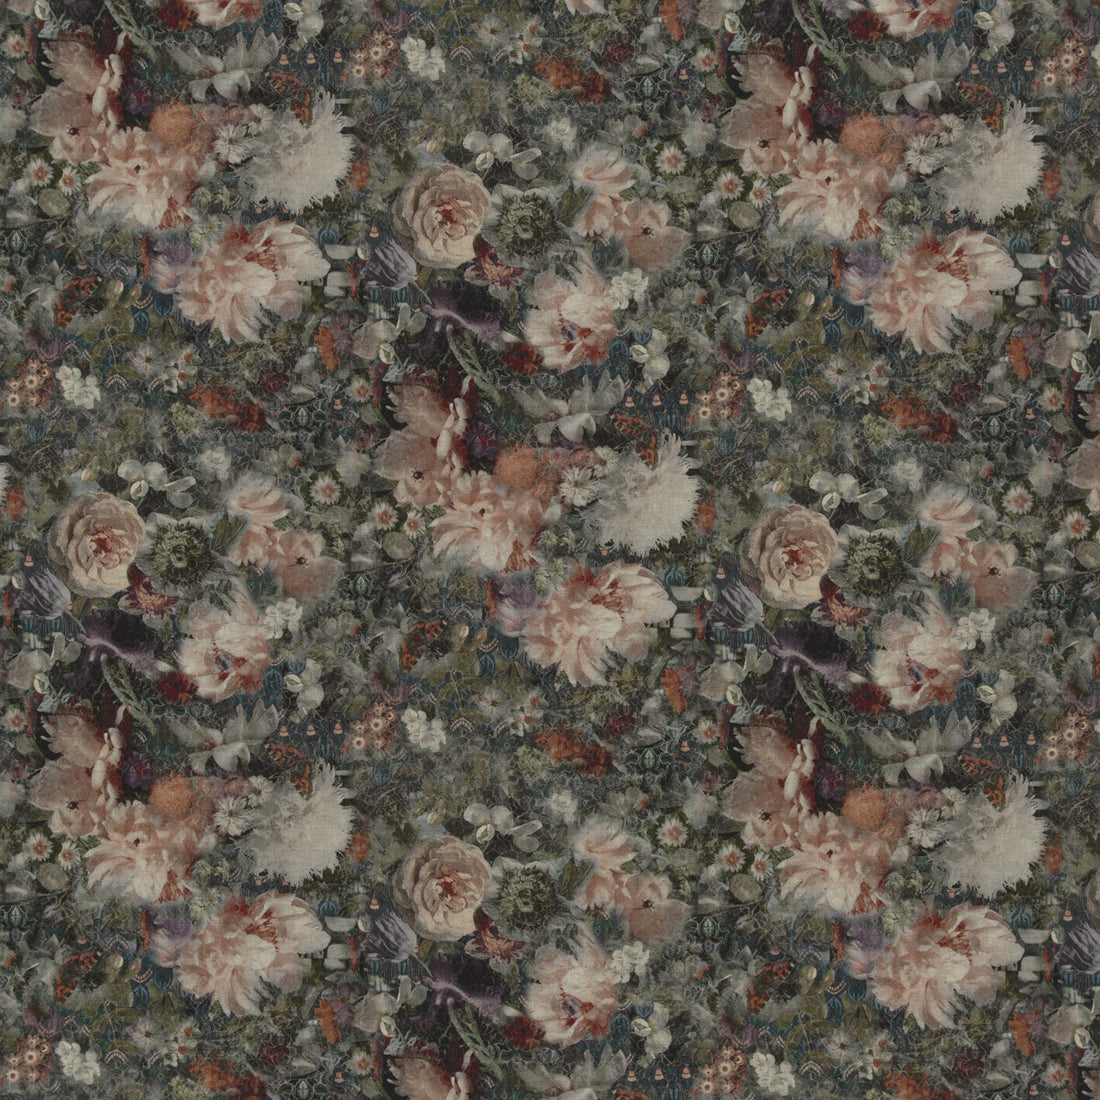 Royal Garden Linen fabric in quartz color - pattern BP10643.1.0 - by G P &amp; J Baker in the Historic Royal Palaces collection